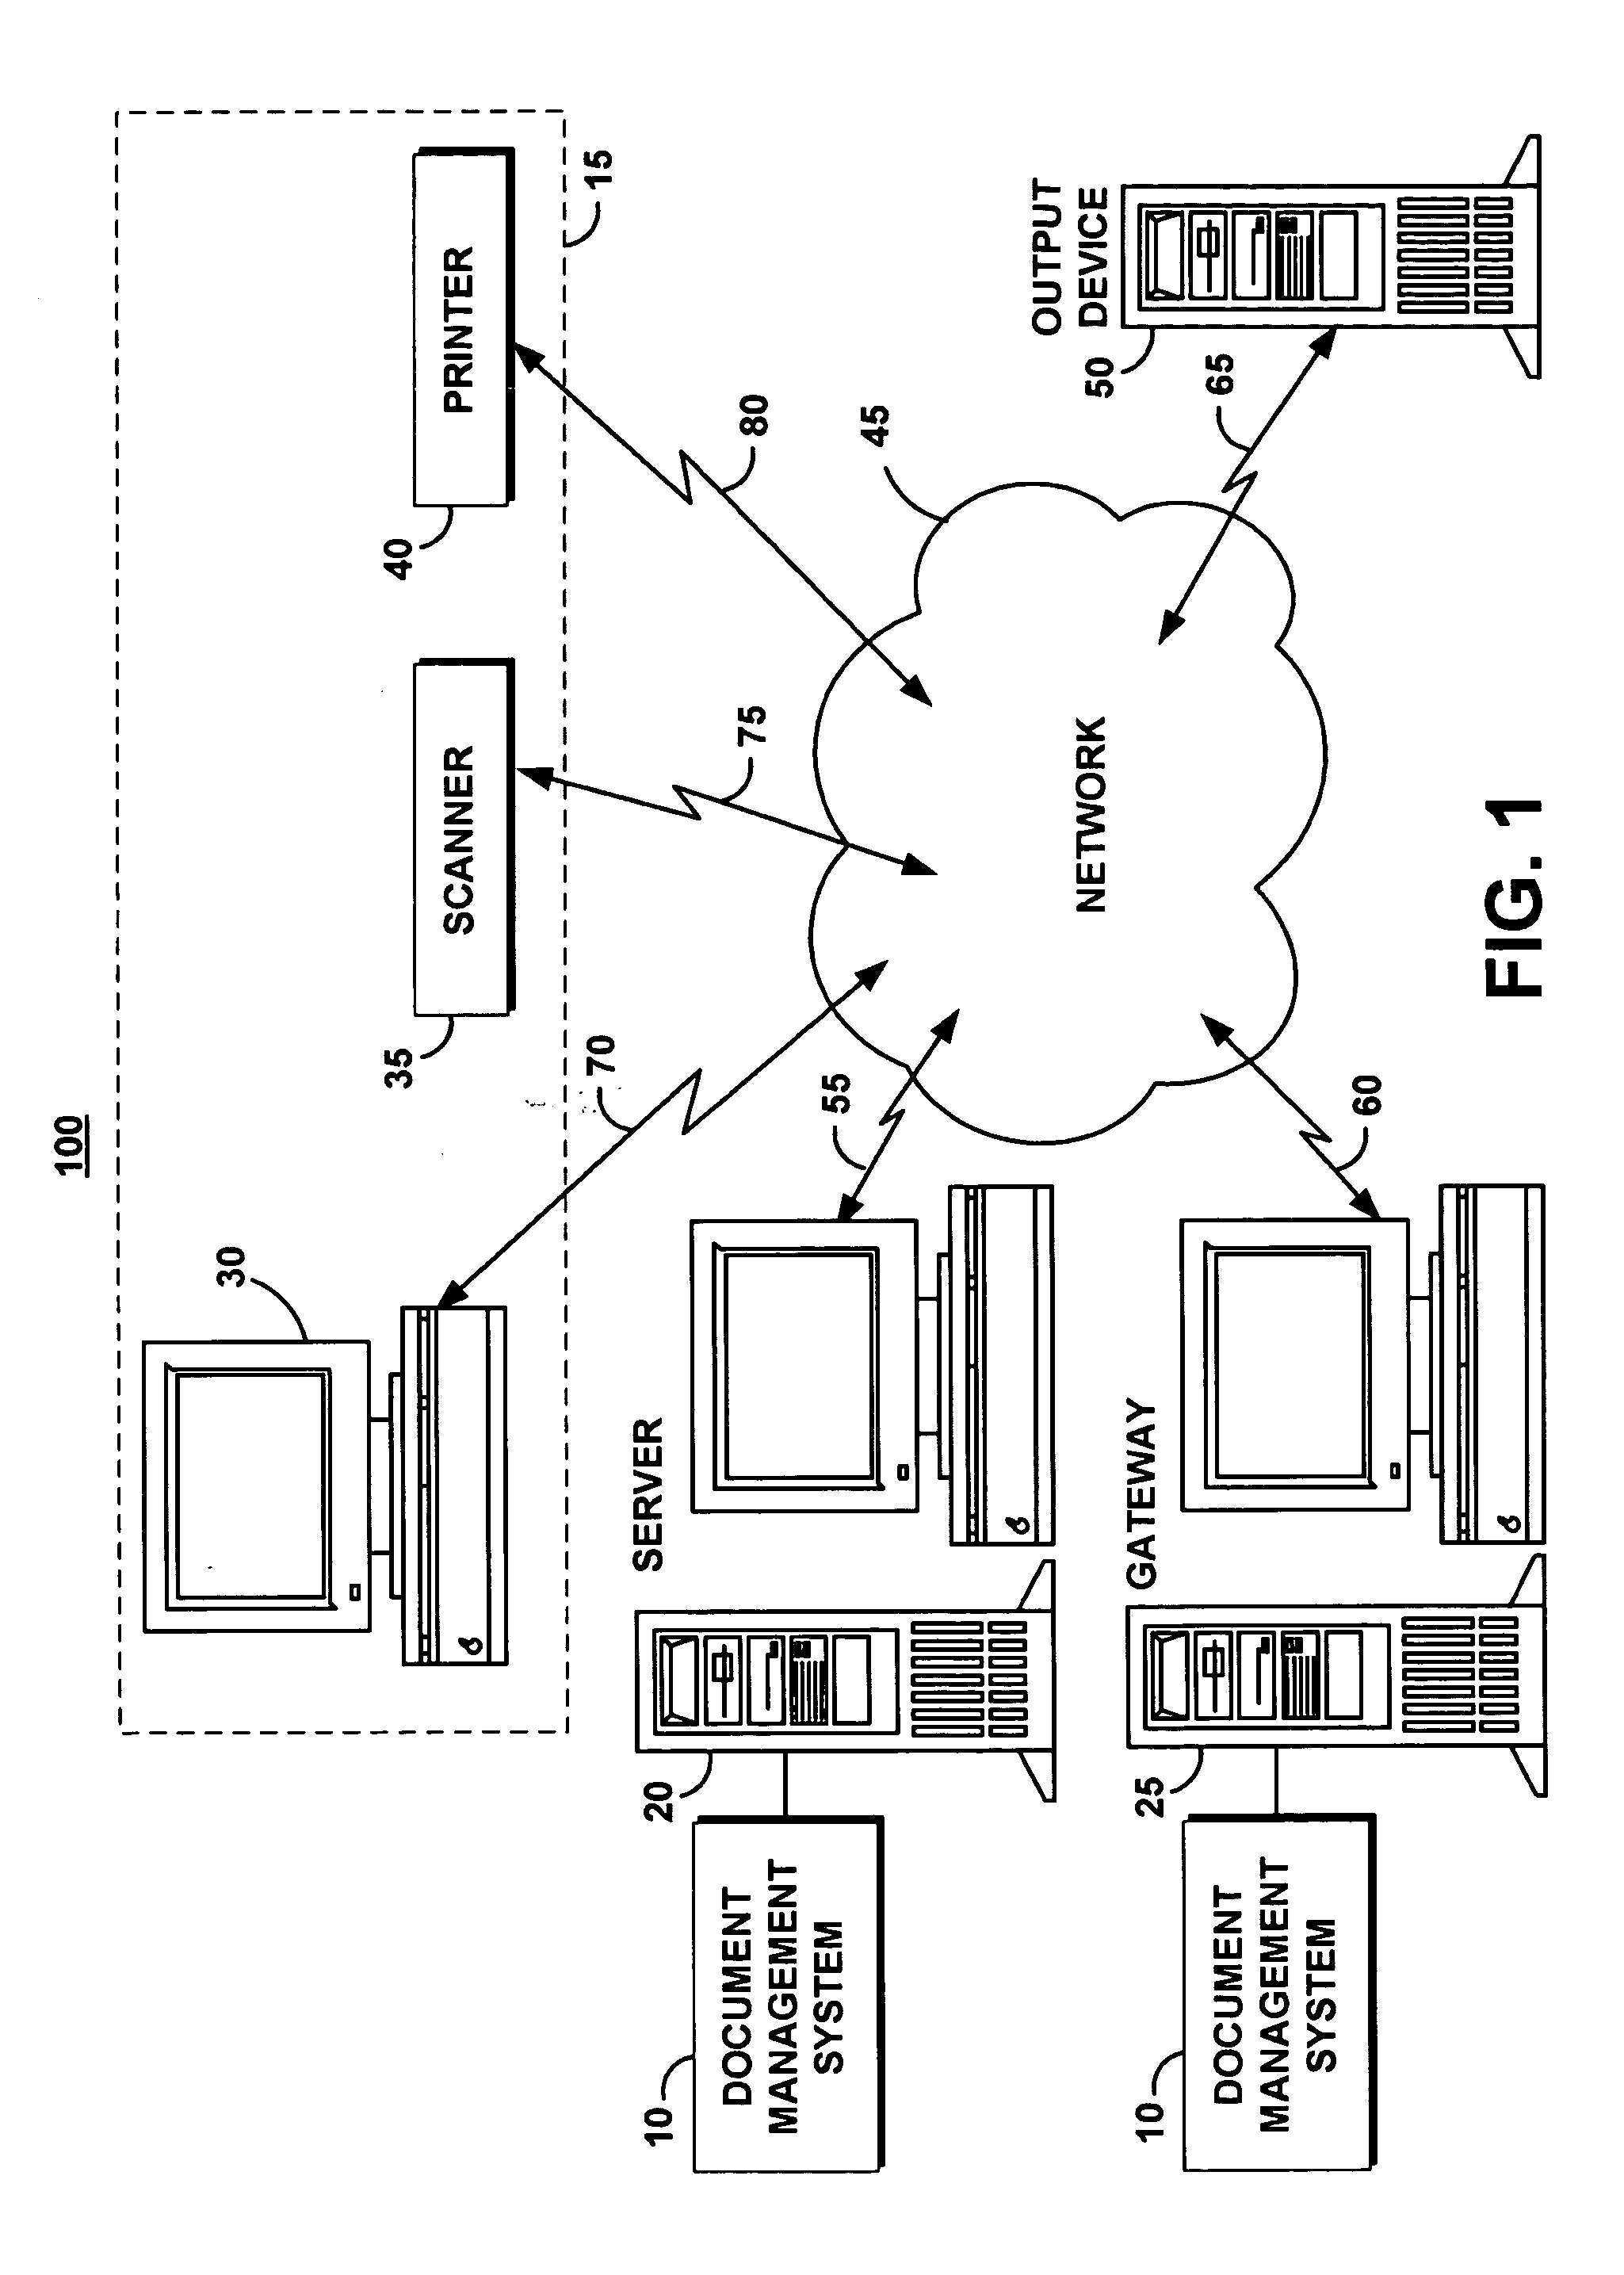 System, method, and service for automatically and dynamically composing document management applications